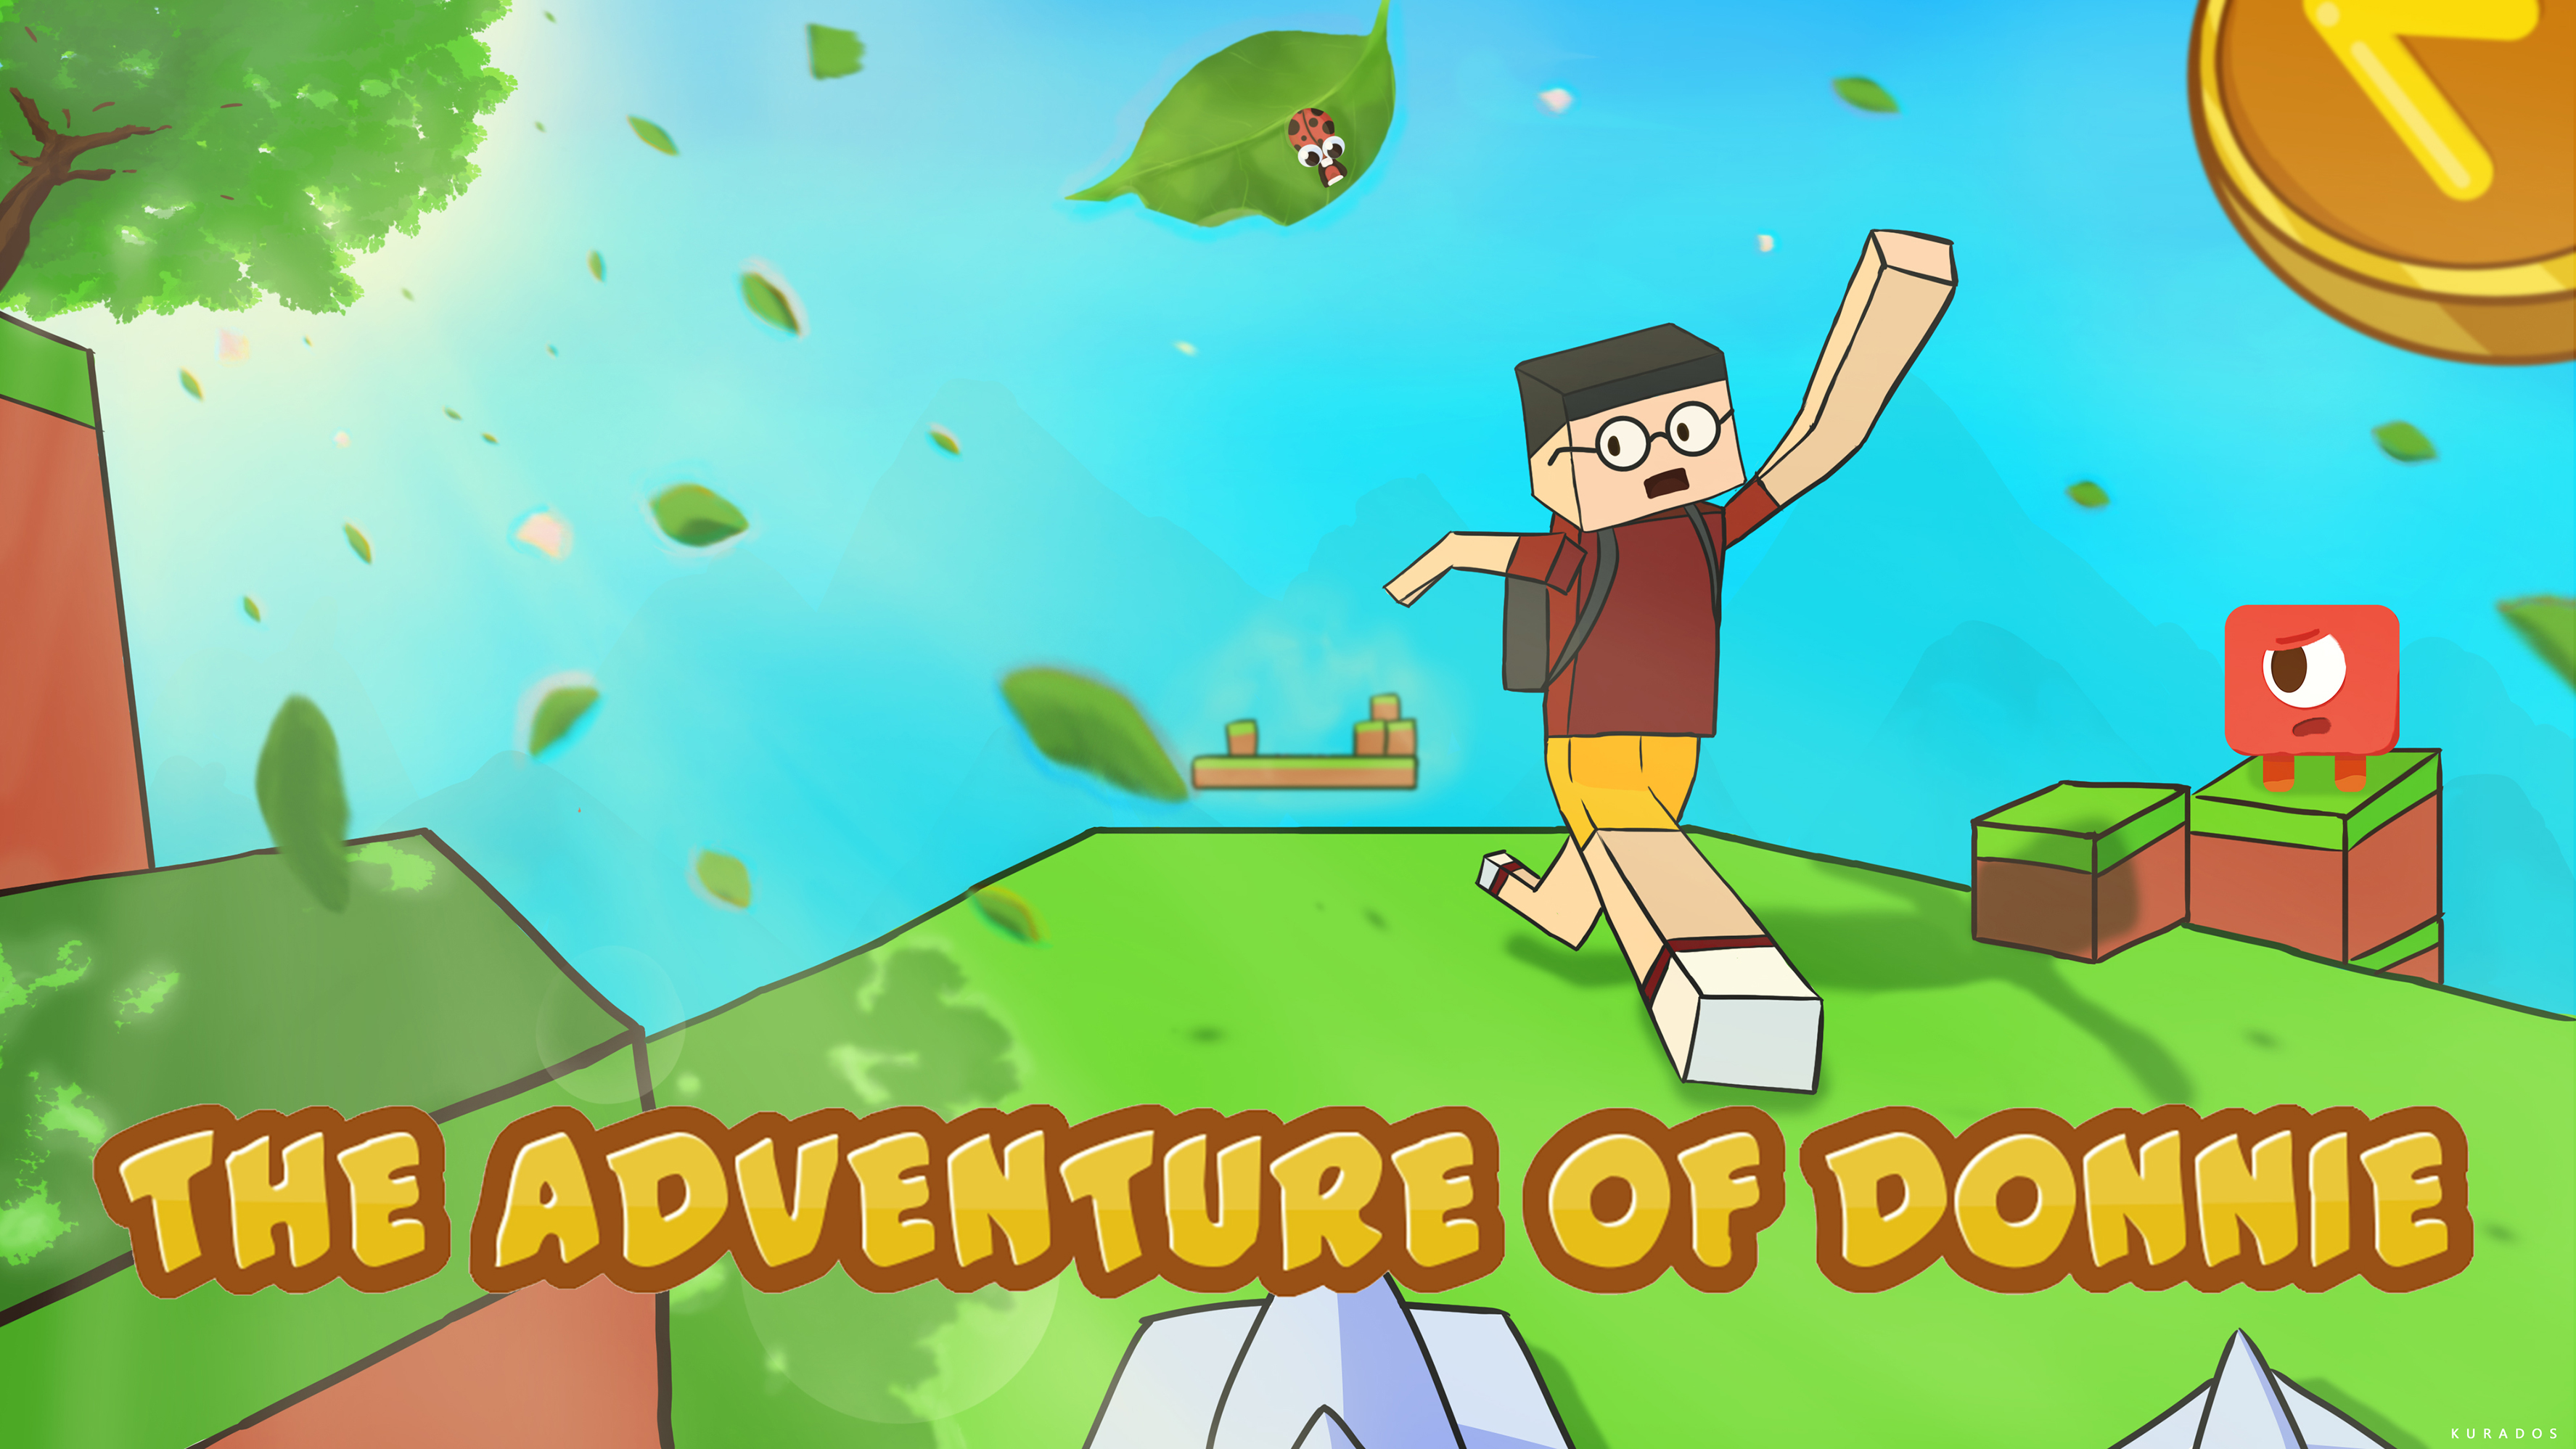 The Adventure of Donnie